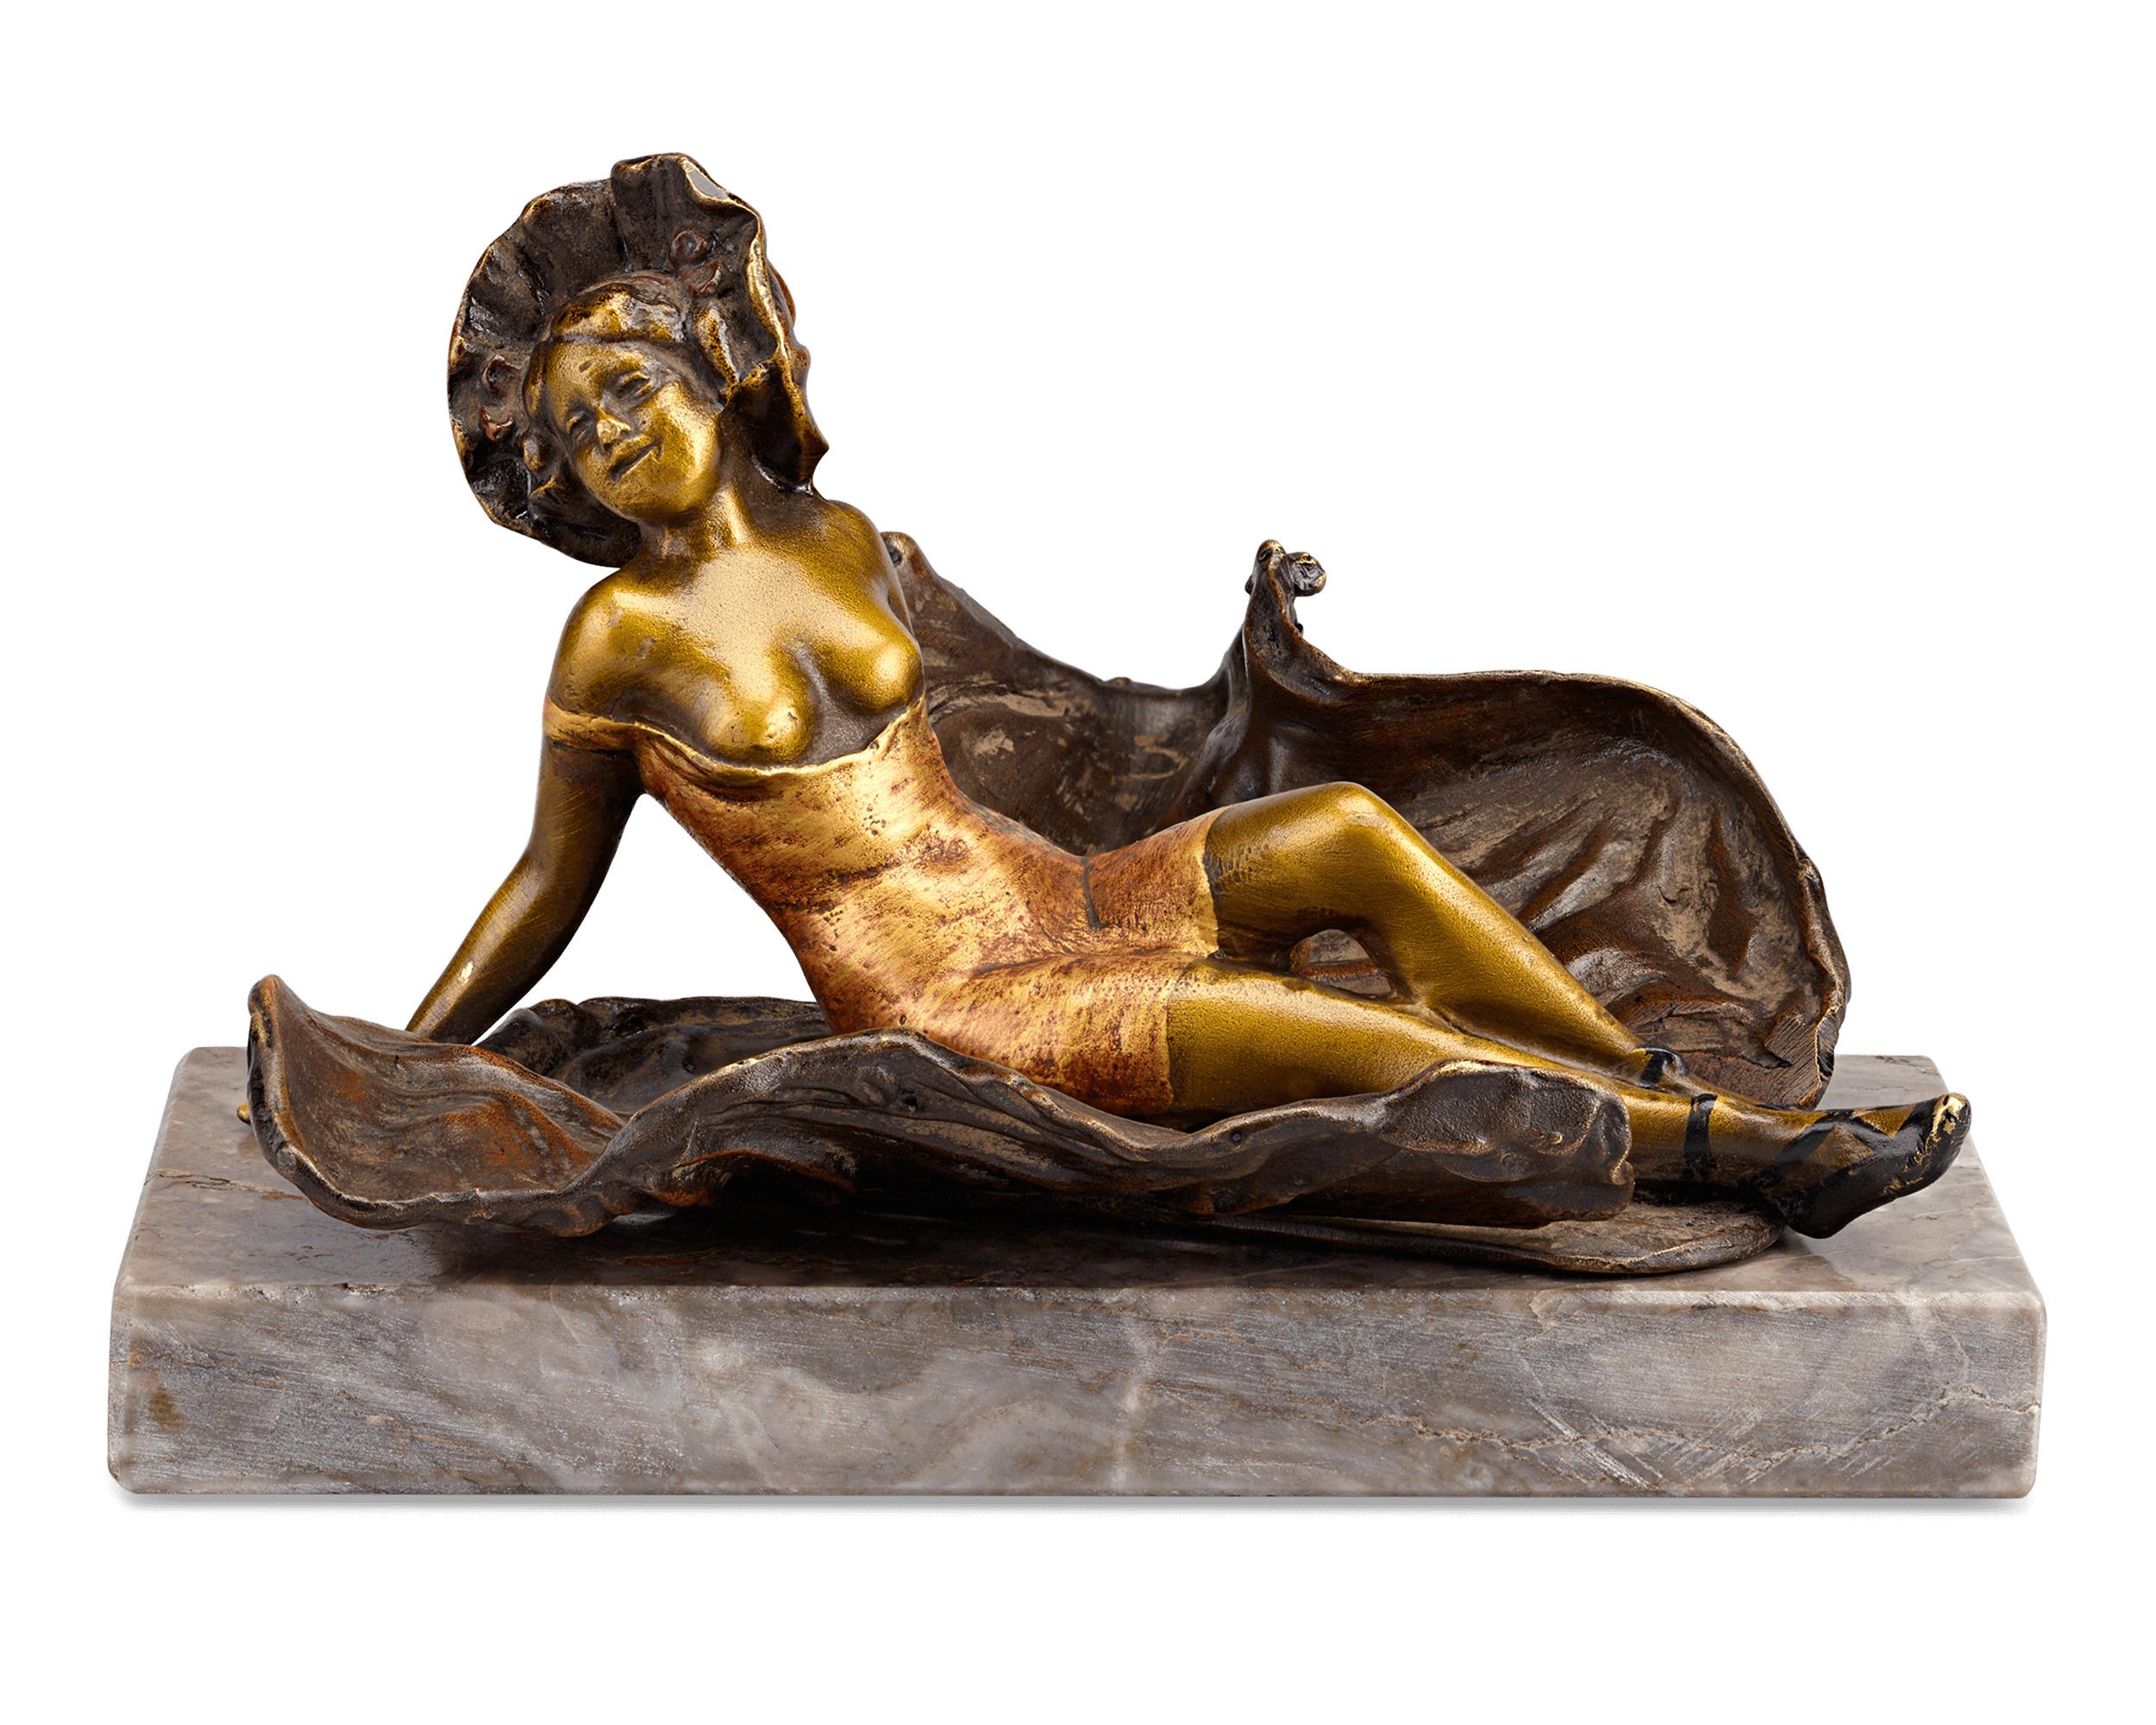 There is more to this enchanting Belle Époque figure than meets the eye. Crafted of bronze with cold-press enamel, this figure of a young woman lounging in her robe hides a tantalizing surprise. Thanks to a hidden hinge, it becomes evident that the